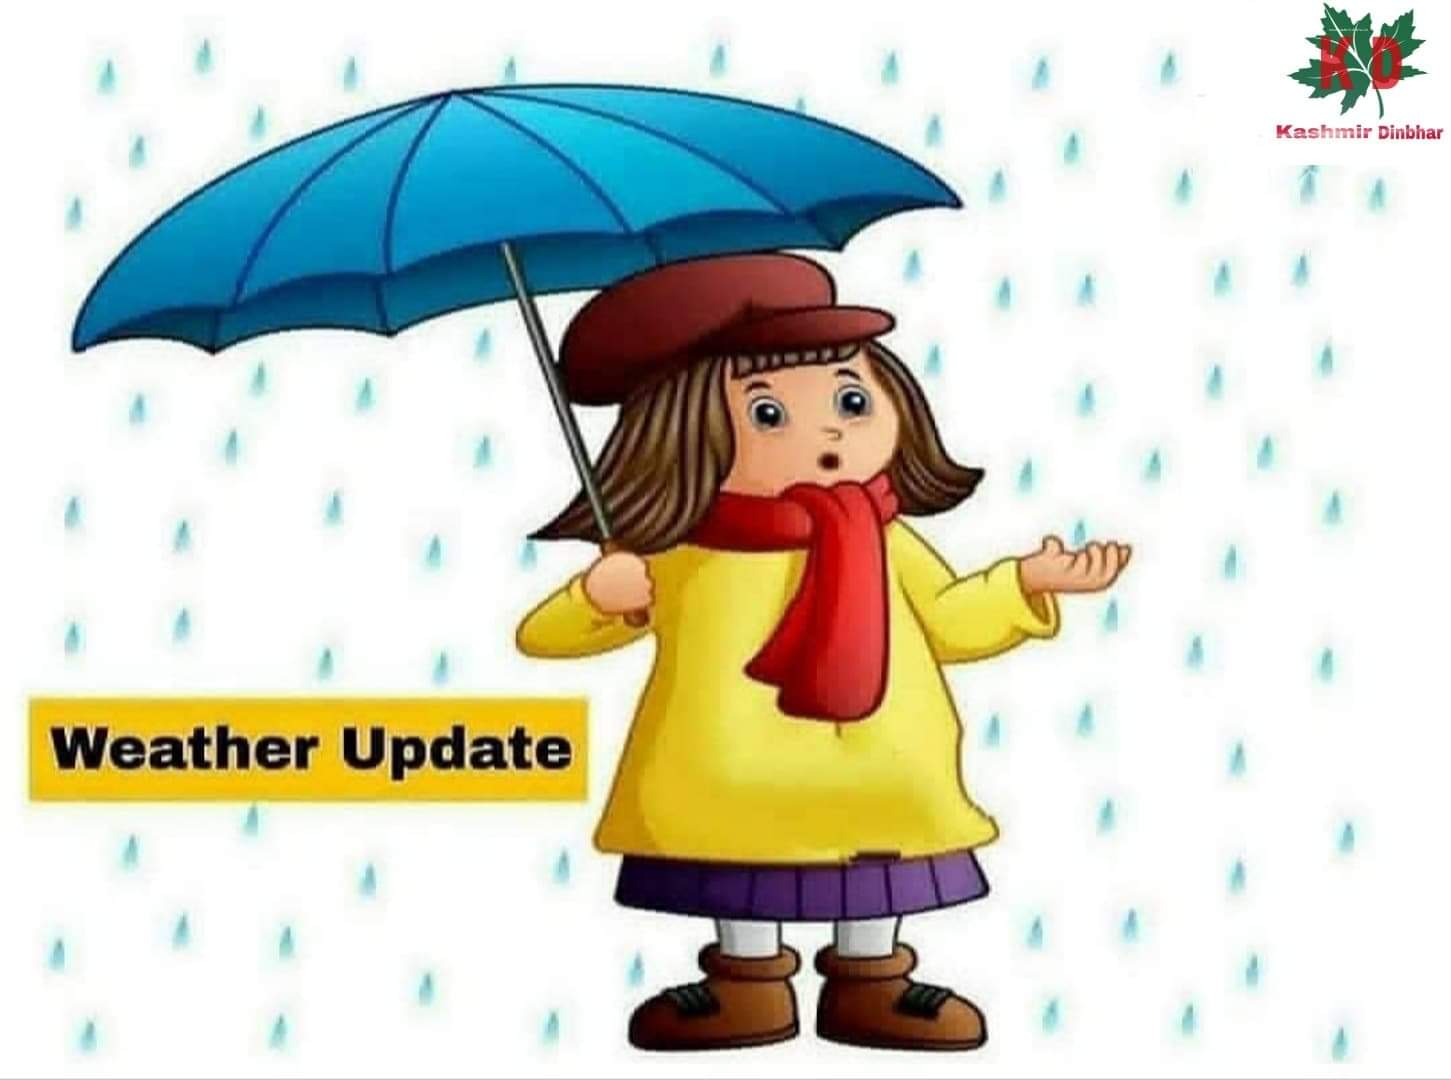 MeT Forecasts Wet Weather In J&K For 2 Days